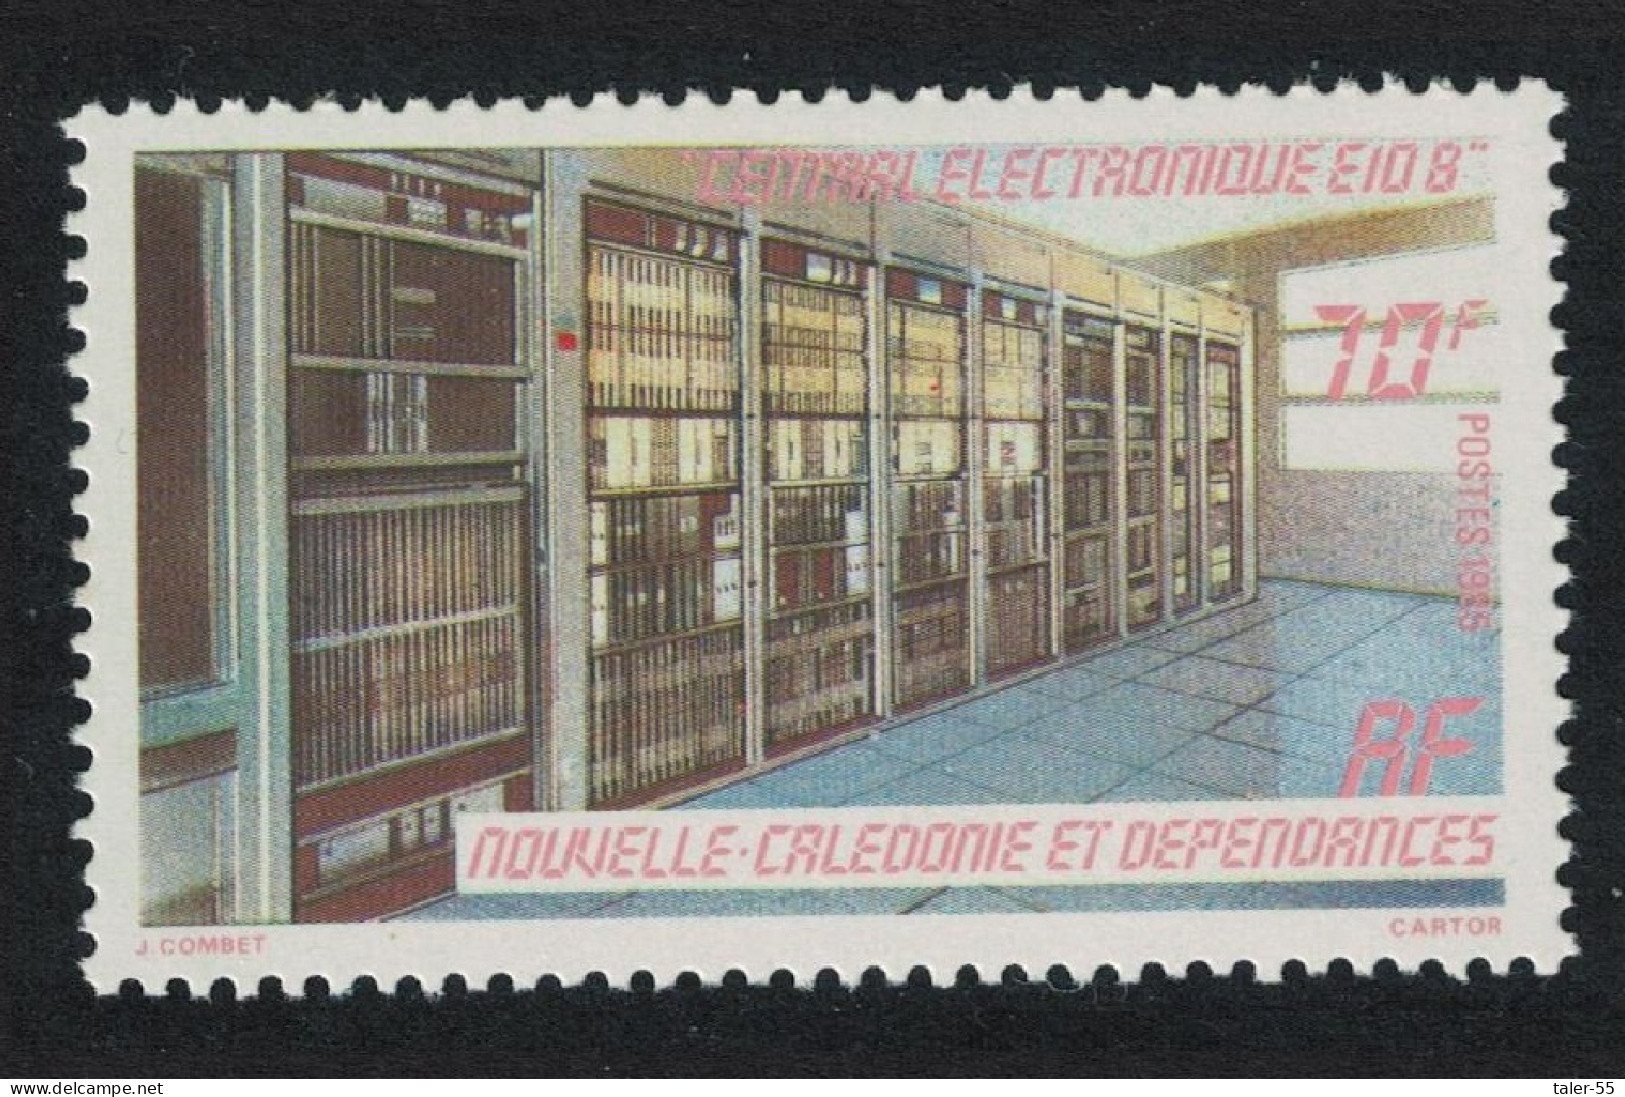 New Caledonia Inauguration Of Electronic Telephone Equipment 1985 MNH SG#765 - Unused Stamps